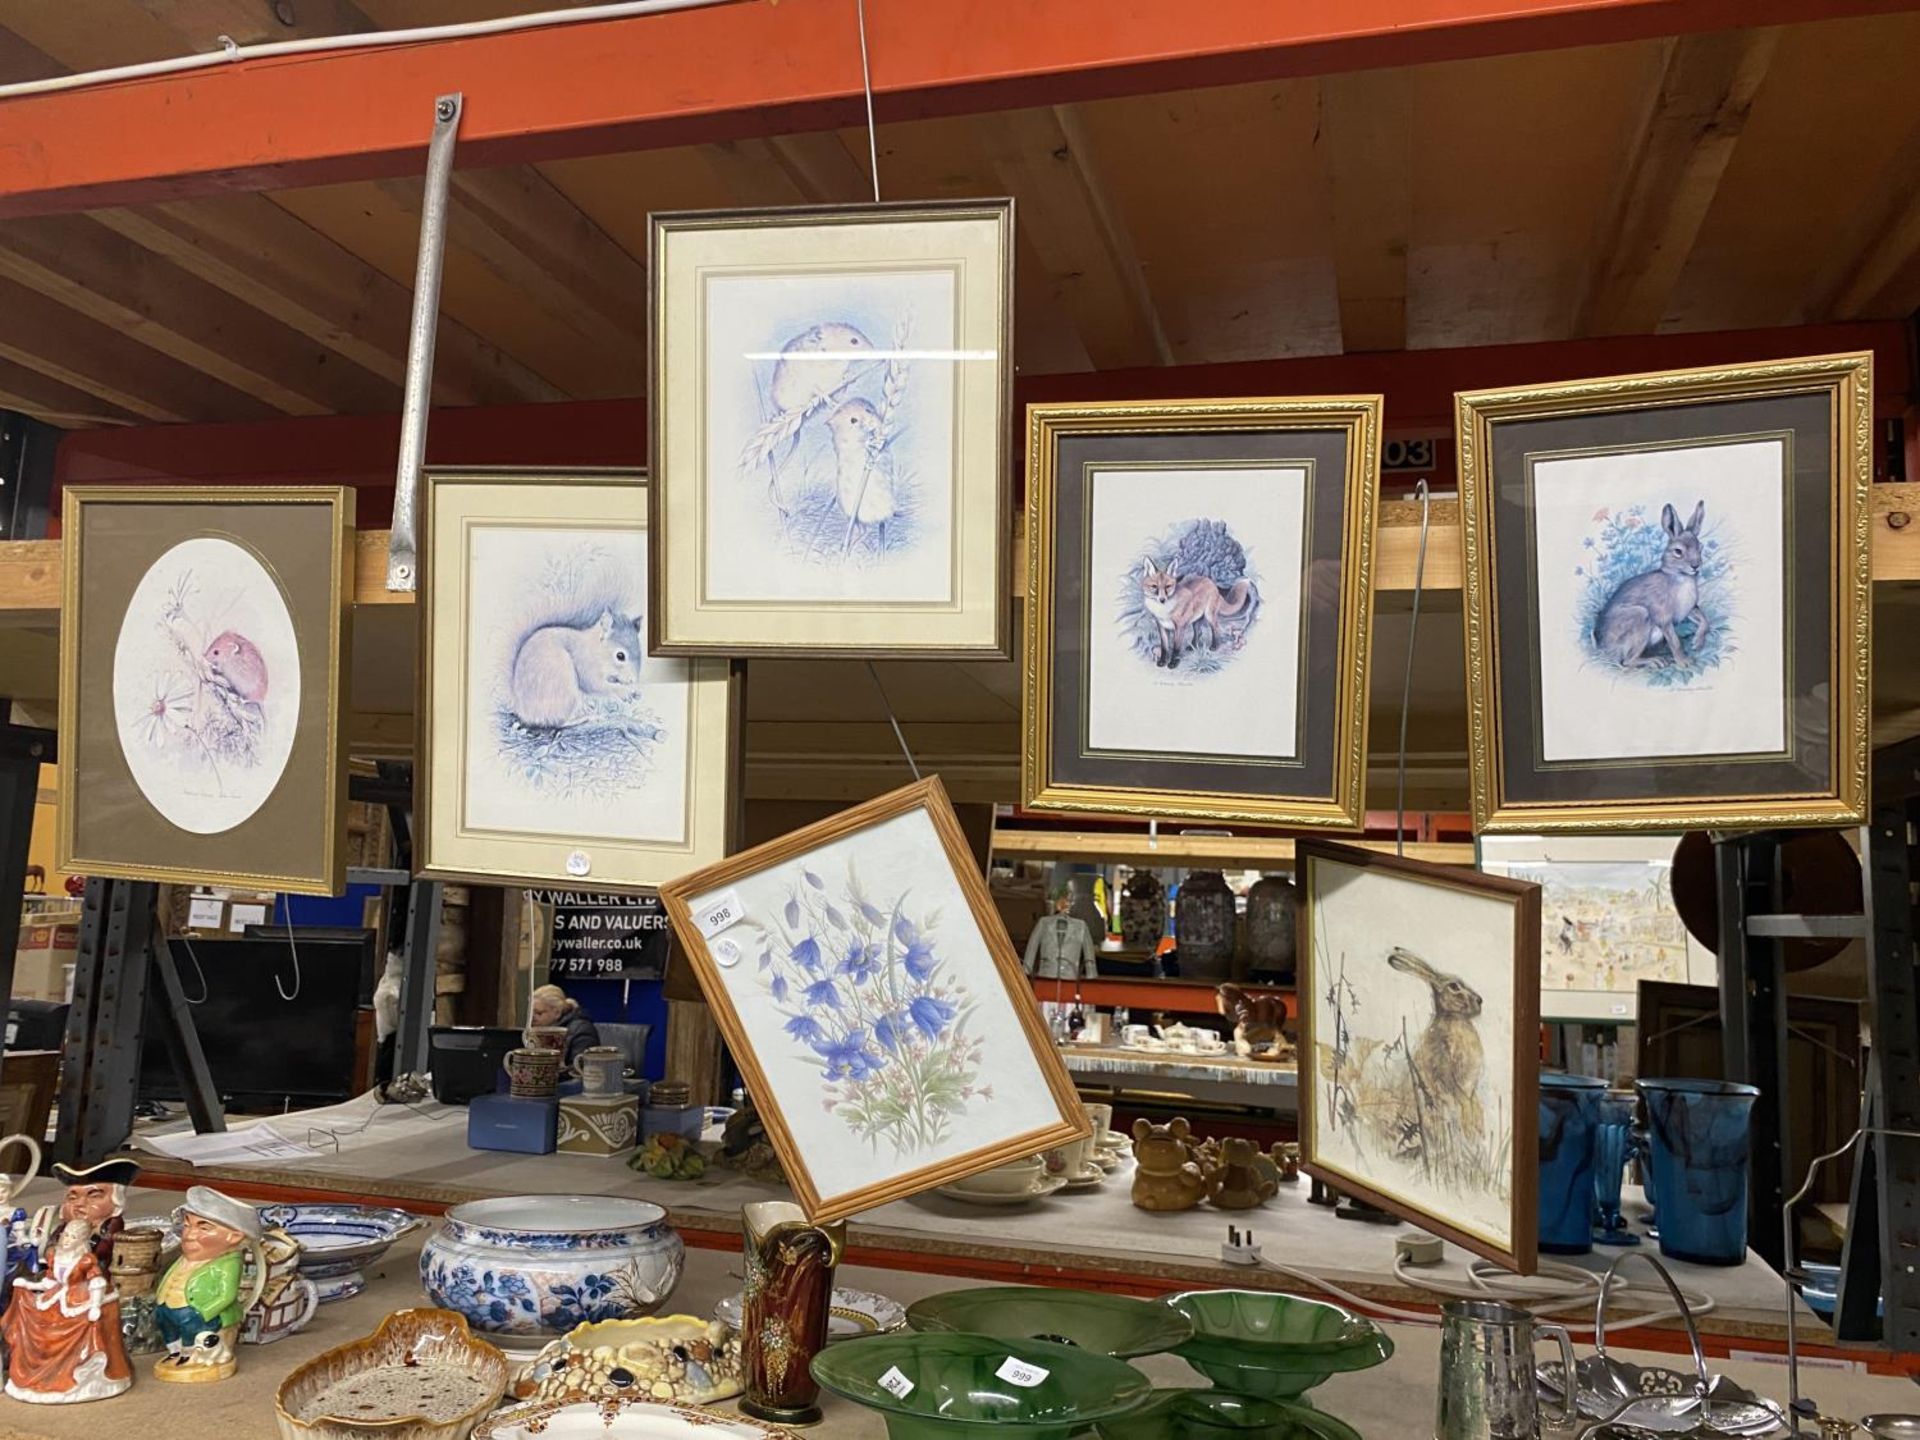 A QUANTITY OF FRAMED ANIMAL PRINTS TO INCLUDE RABBITS, MICE, A FOX, ETC